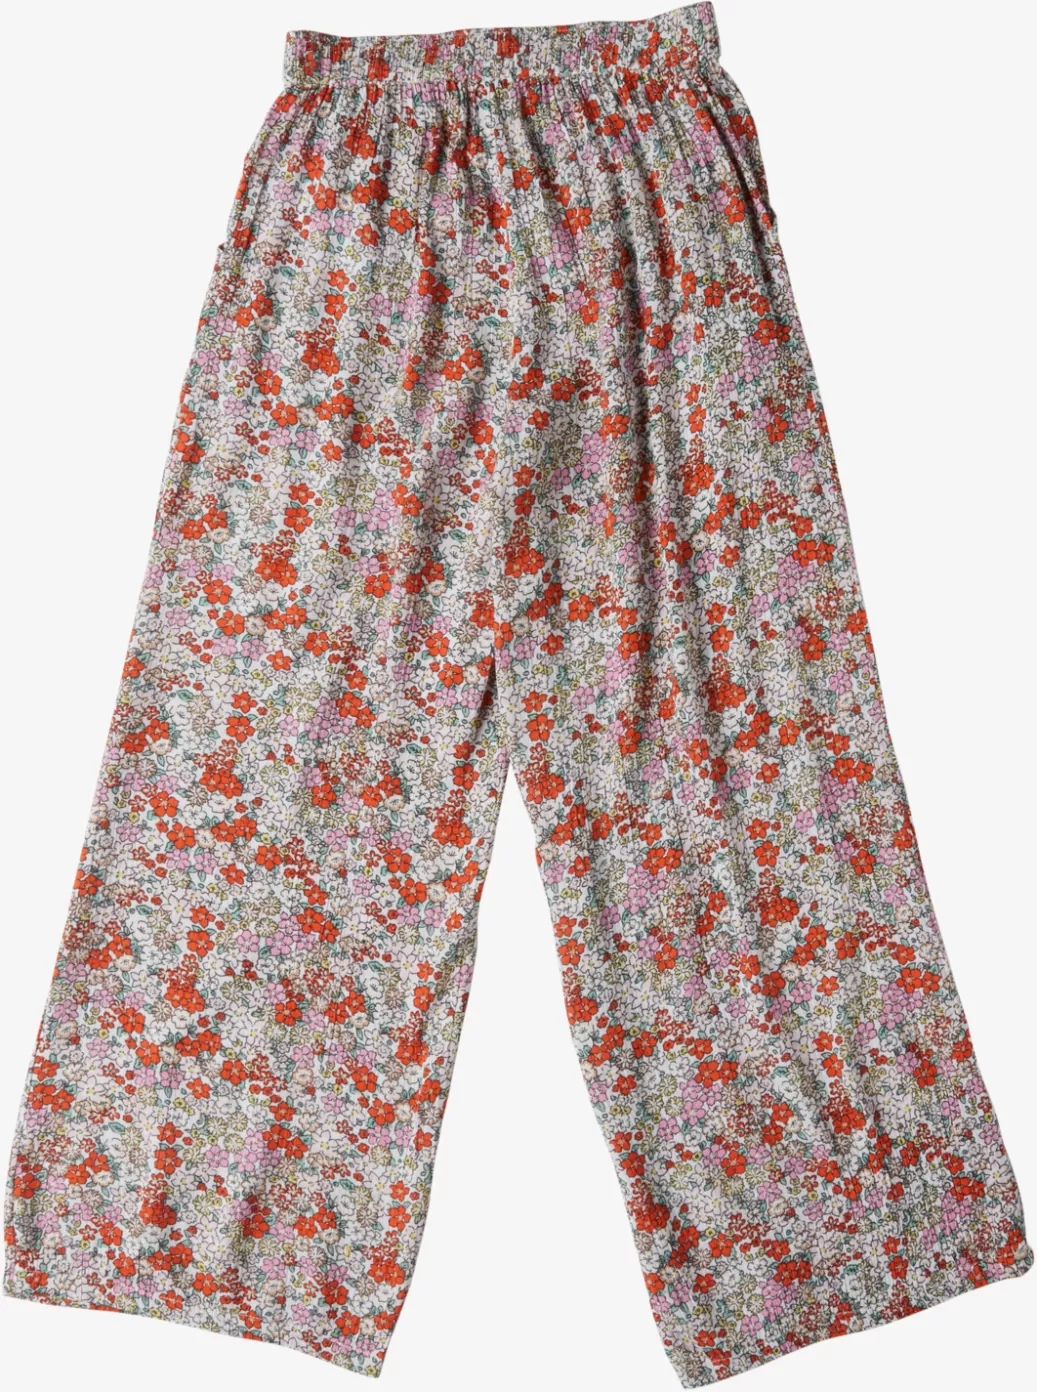 Jeans & Pants | KIDS ROXY Girls' 4-16 You Found Me Palazzo Pants Tiger Lily Autumn Ditsy